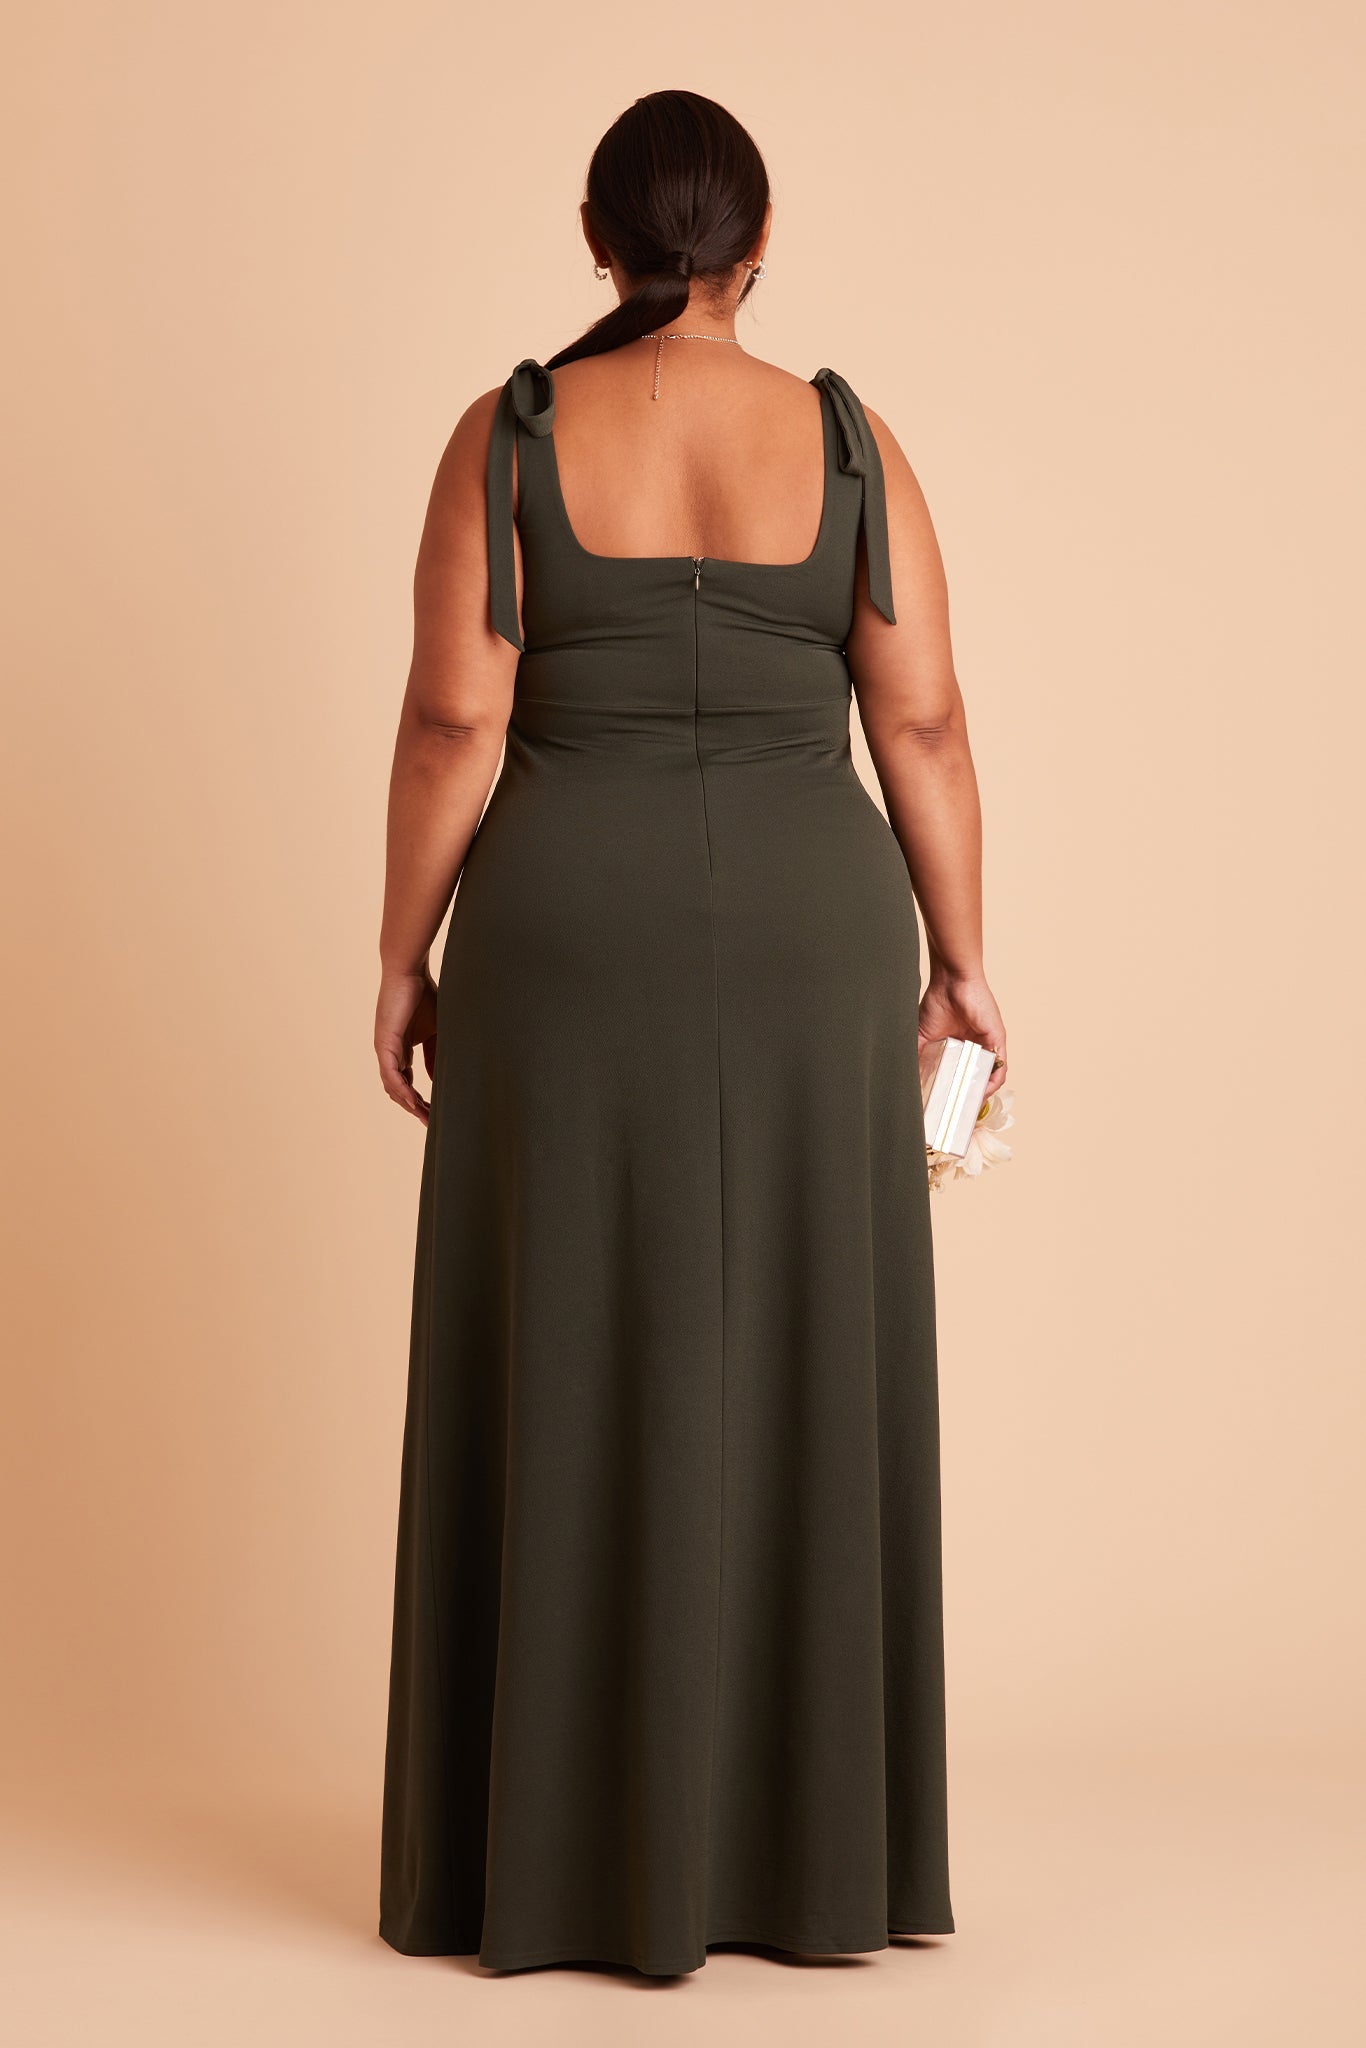 Alex convertible plus size bridesmaid dress with slit in olive crepe by Birdy Grey, back view